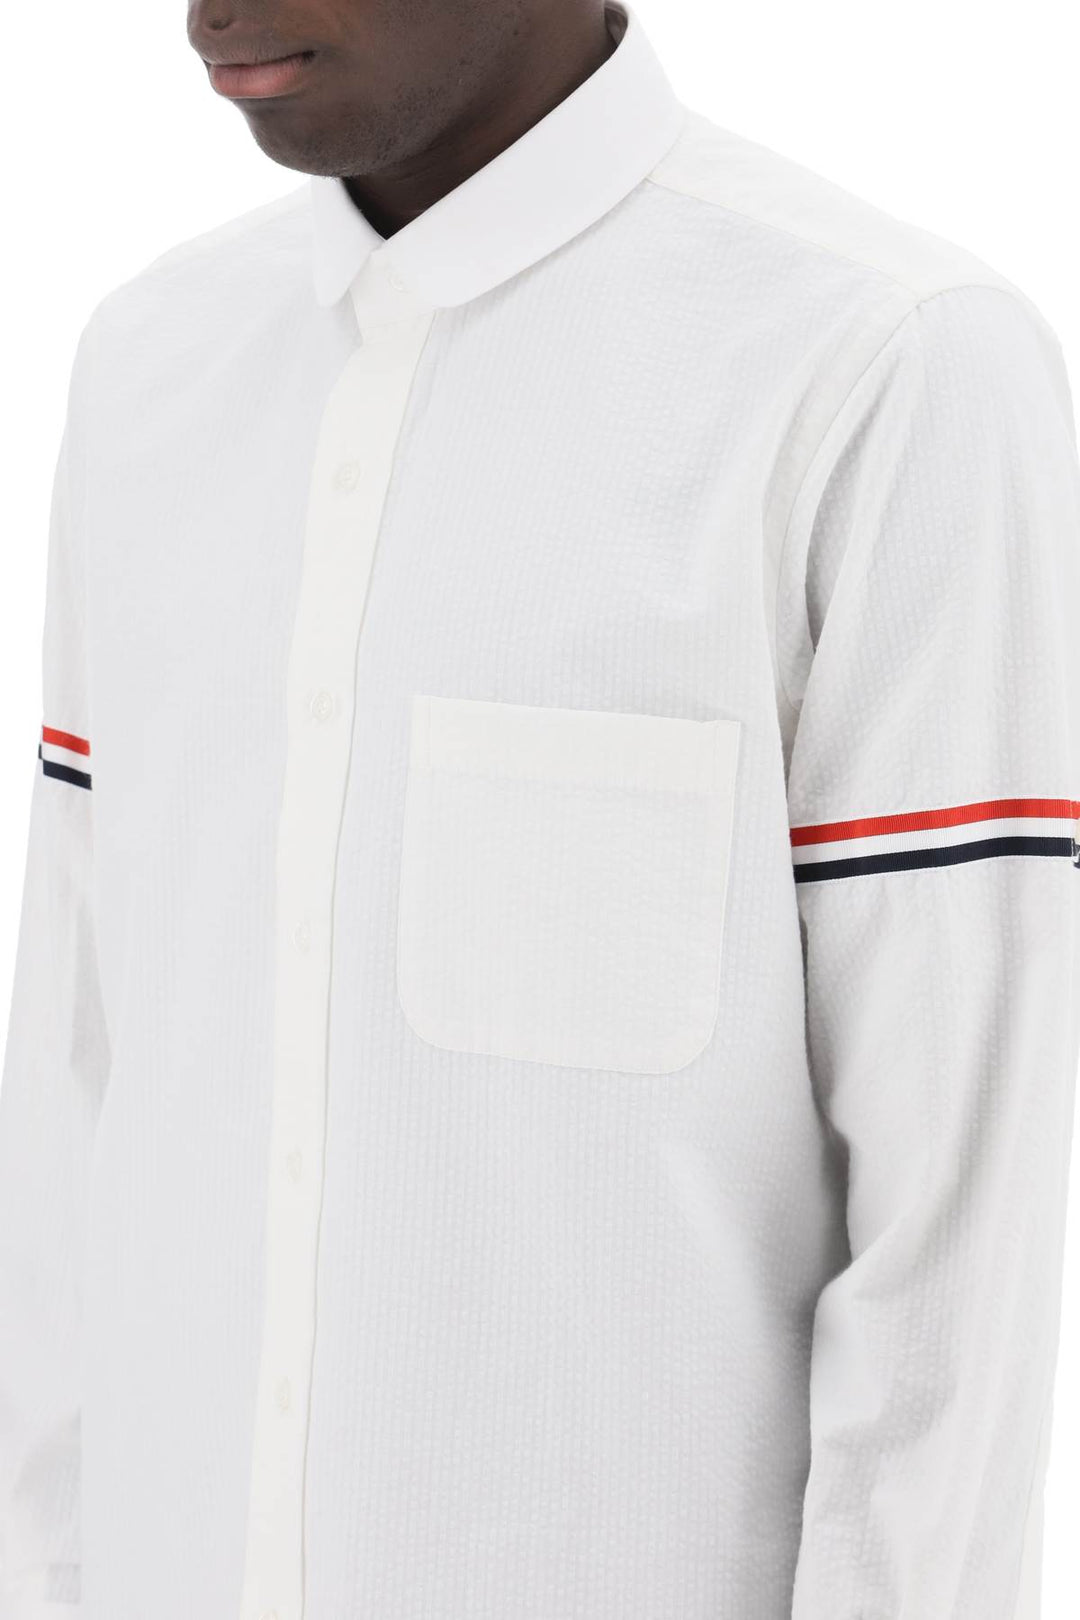 Thom Browne Seersucker Shirt With Rounded Collar   Bianco